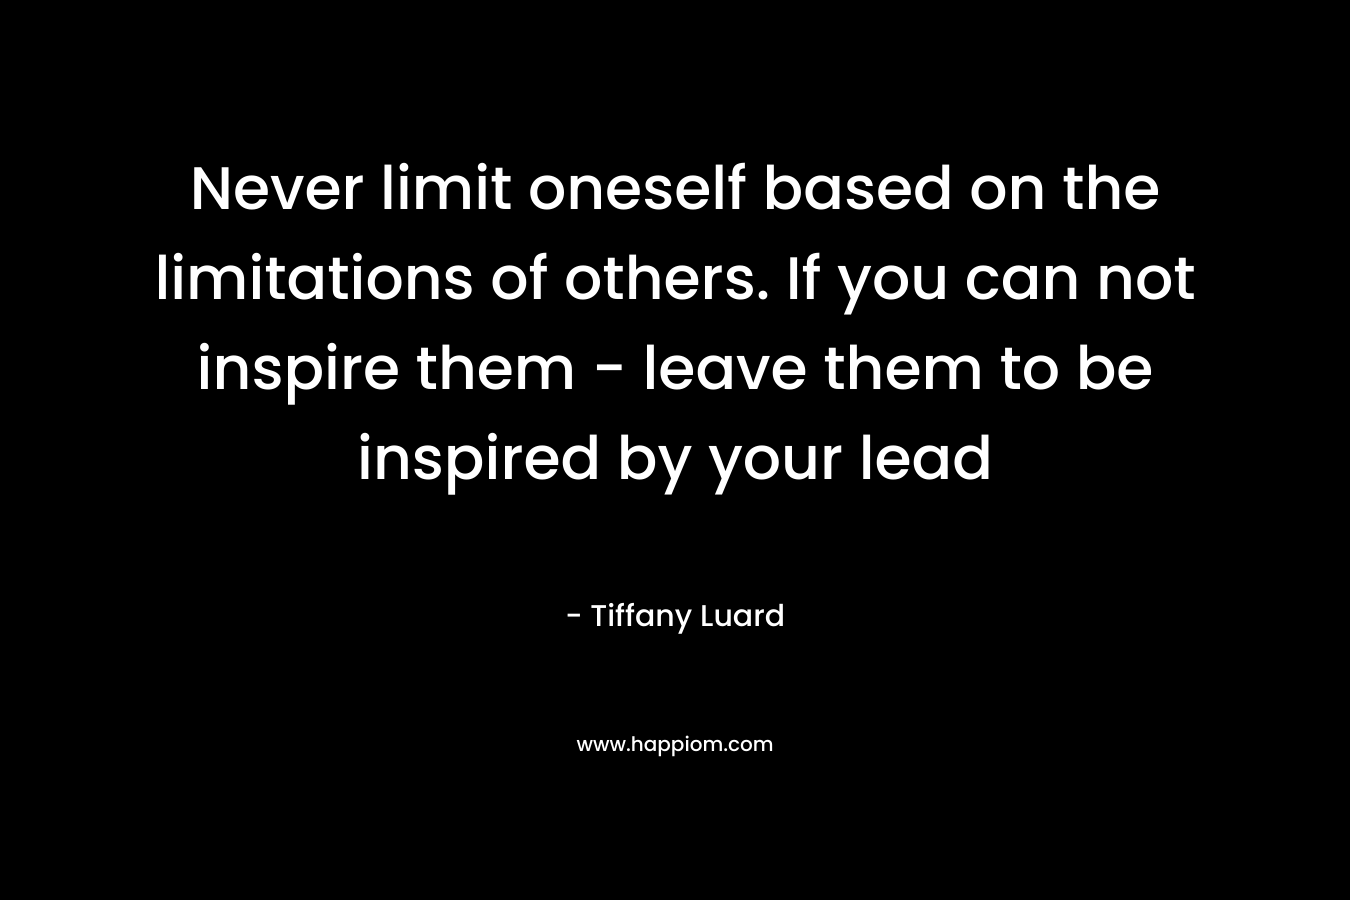 Never limit oneself based on the limitations of others. If you can not inspire them - leave them to be inspired by your lead